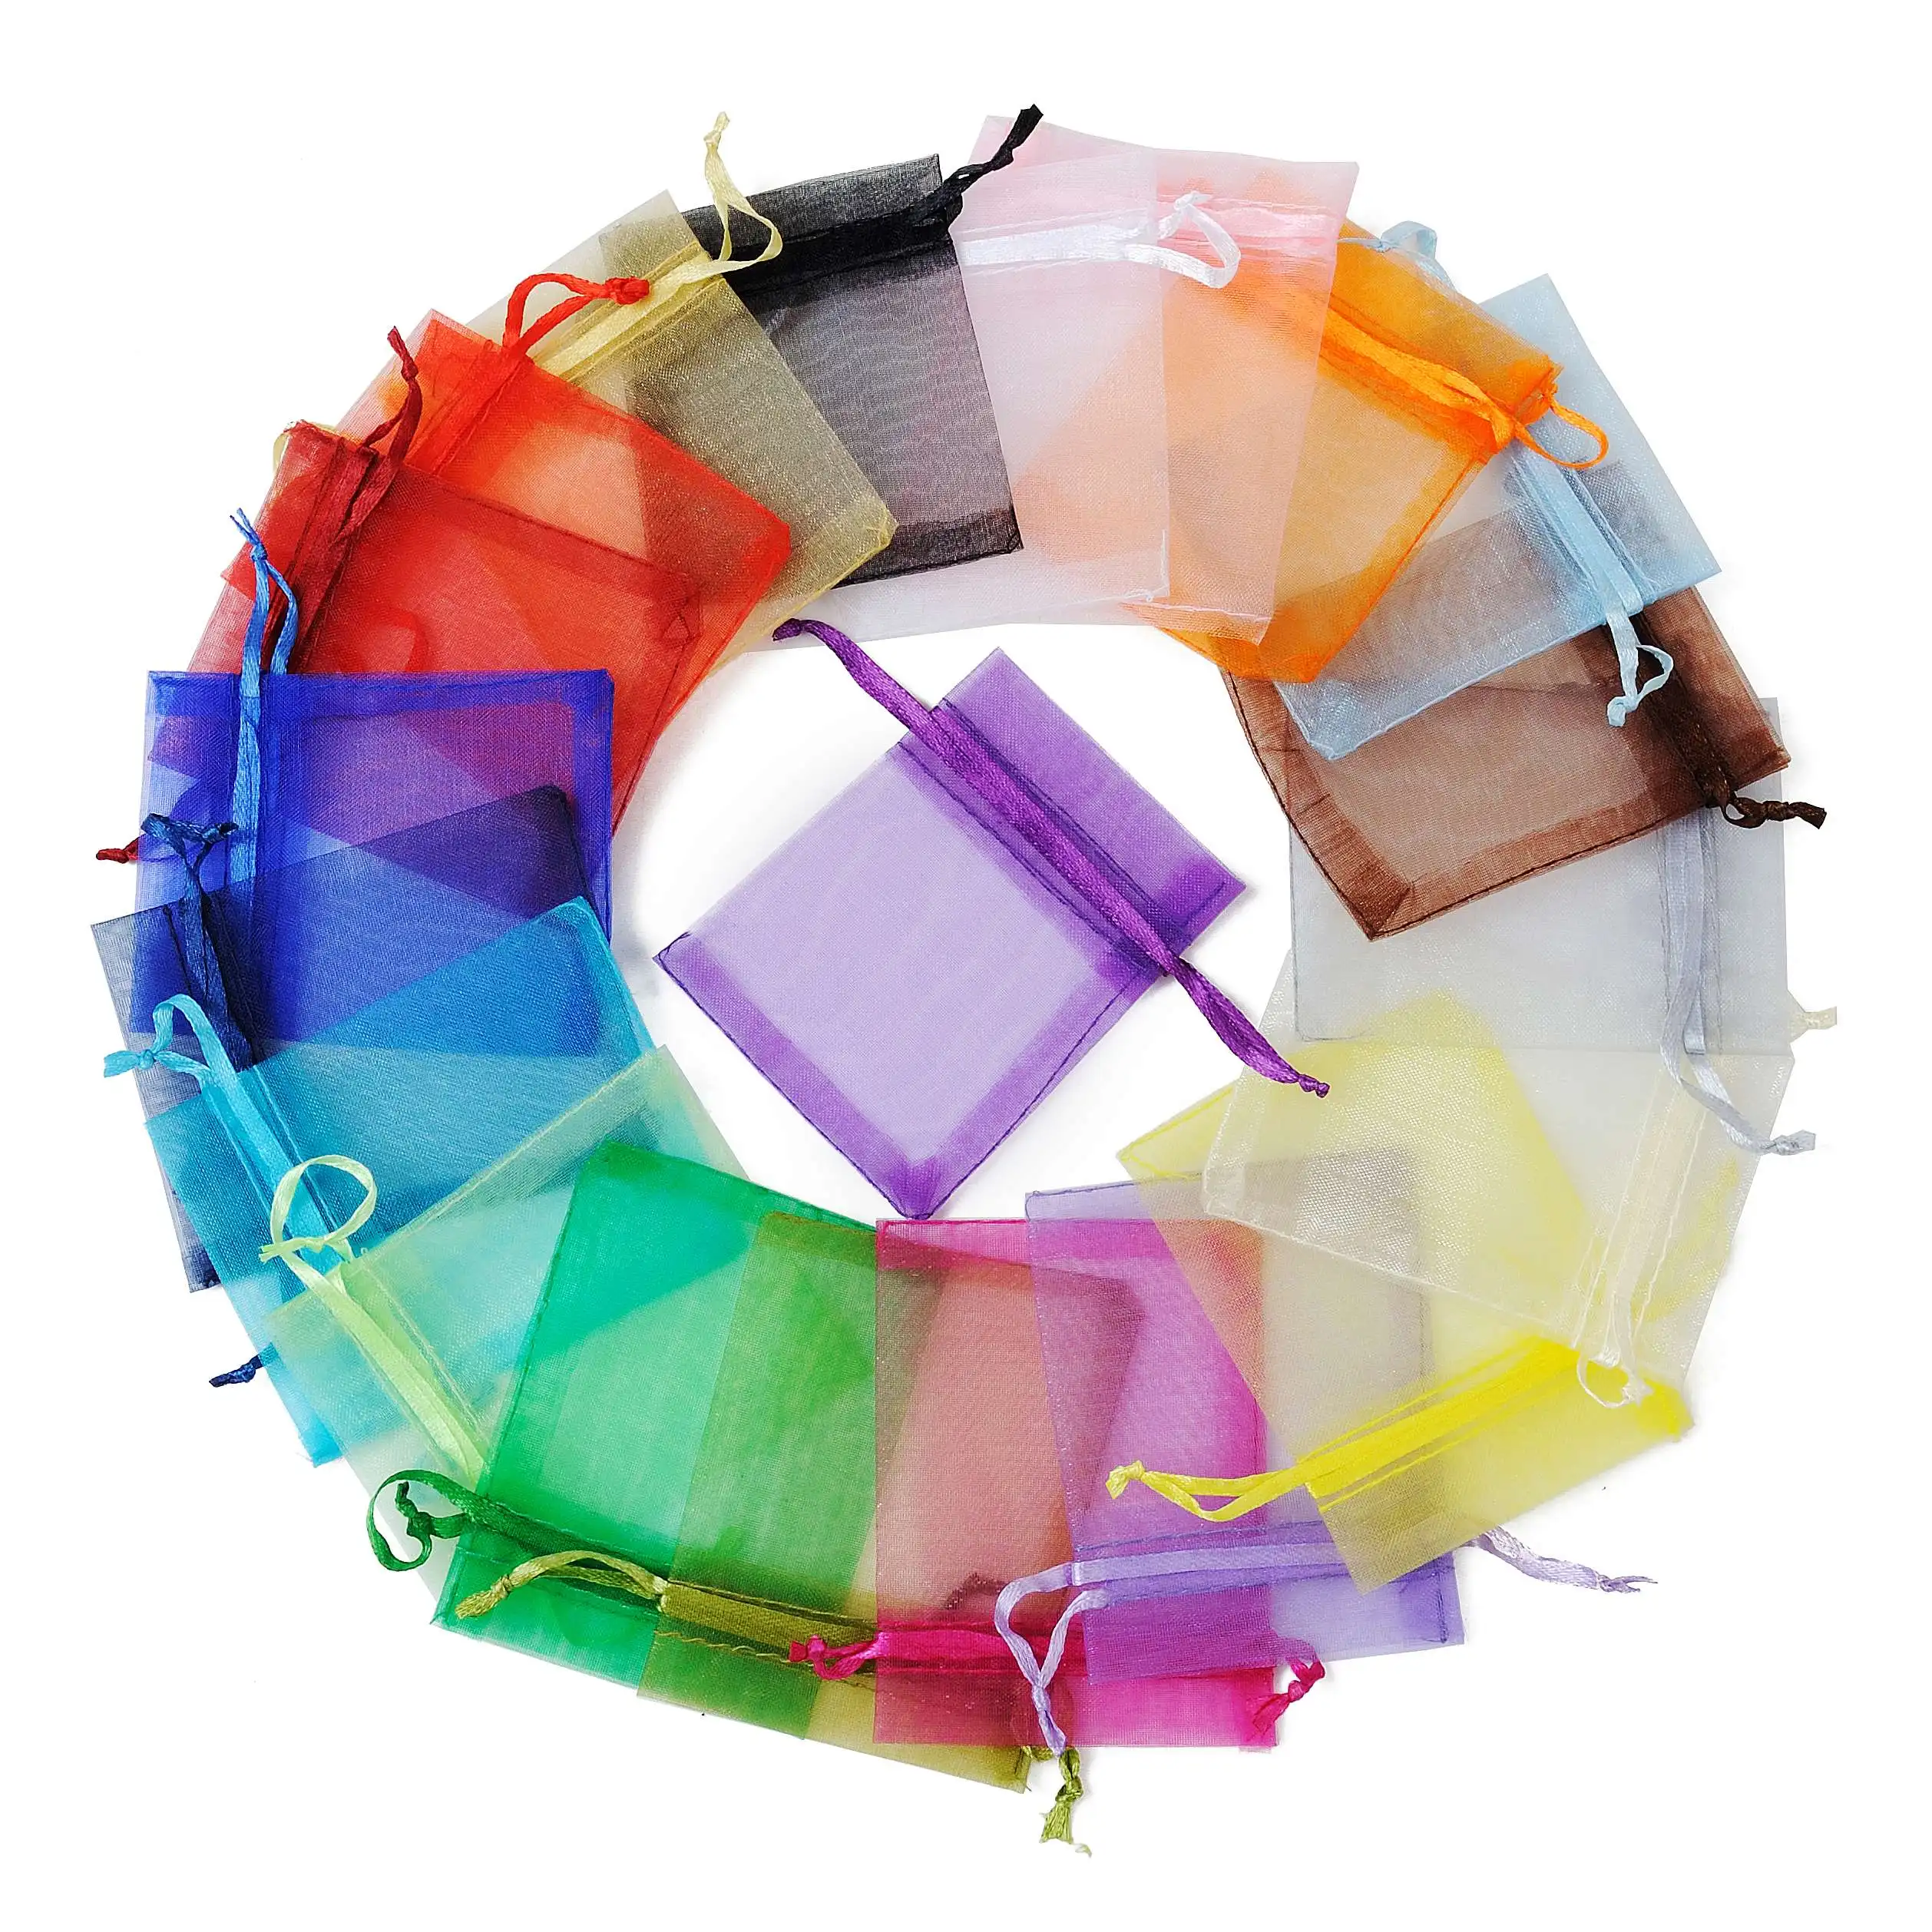 100 Pcs gift organza bag Cloth Jewelry Pouches Small Drawstring Gift Bags  Favor | eBay